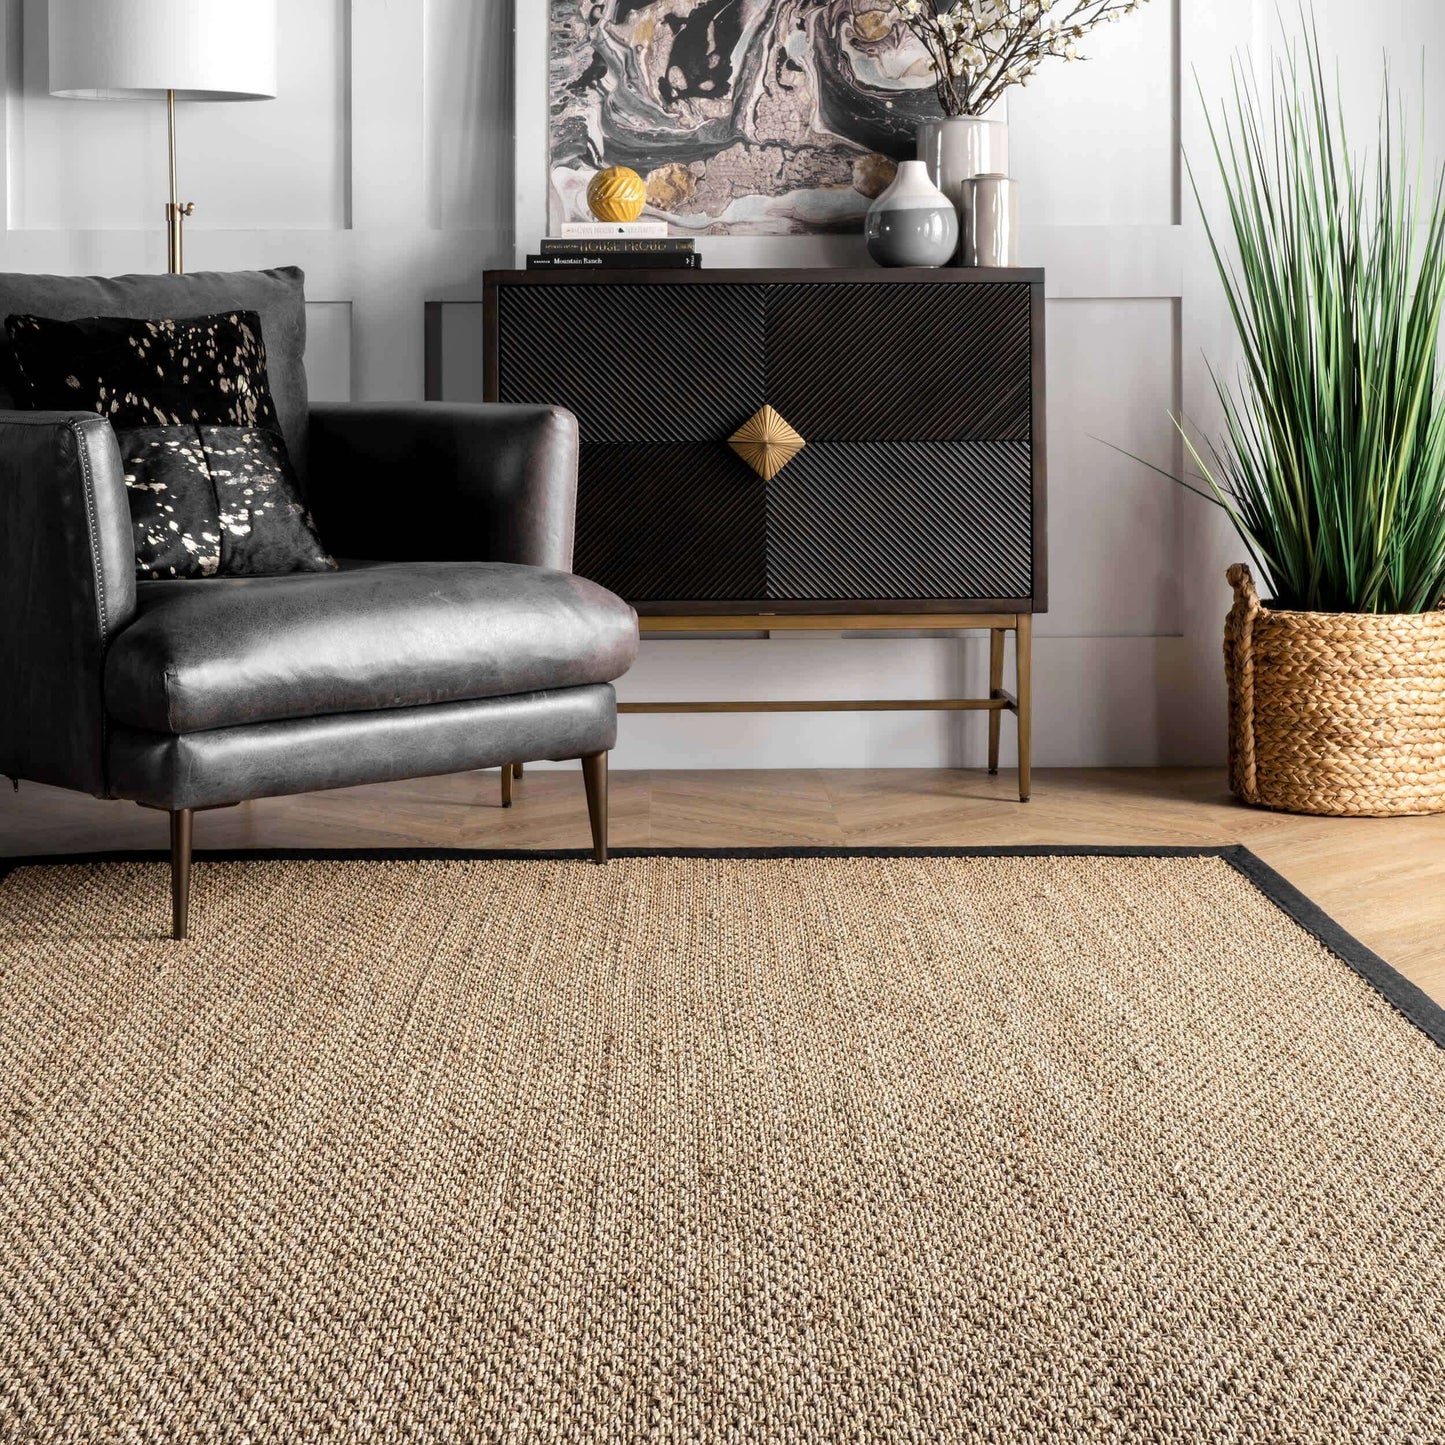 Seagrass Area Rug with Border